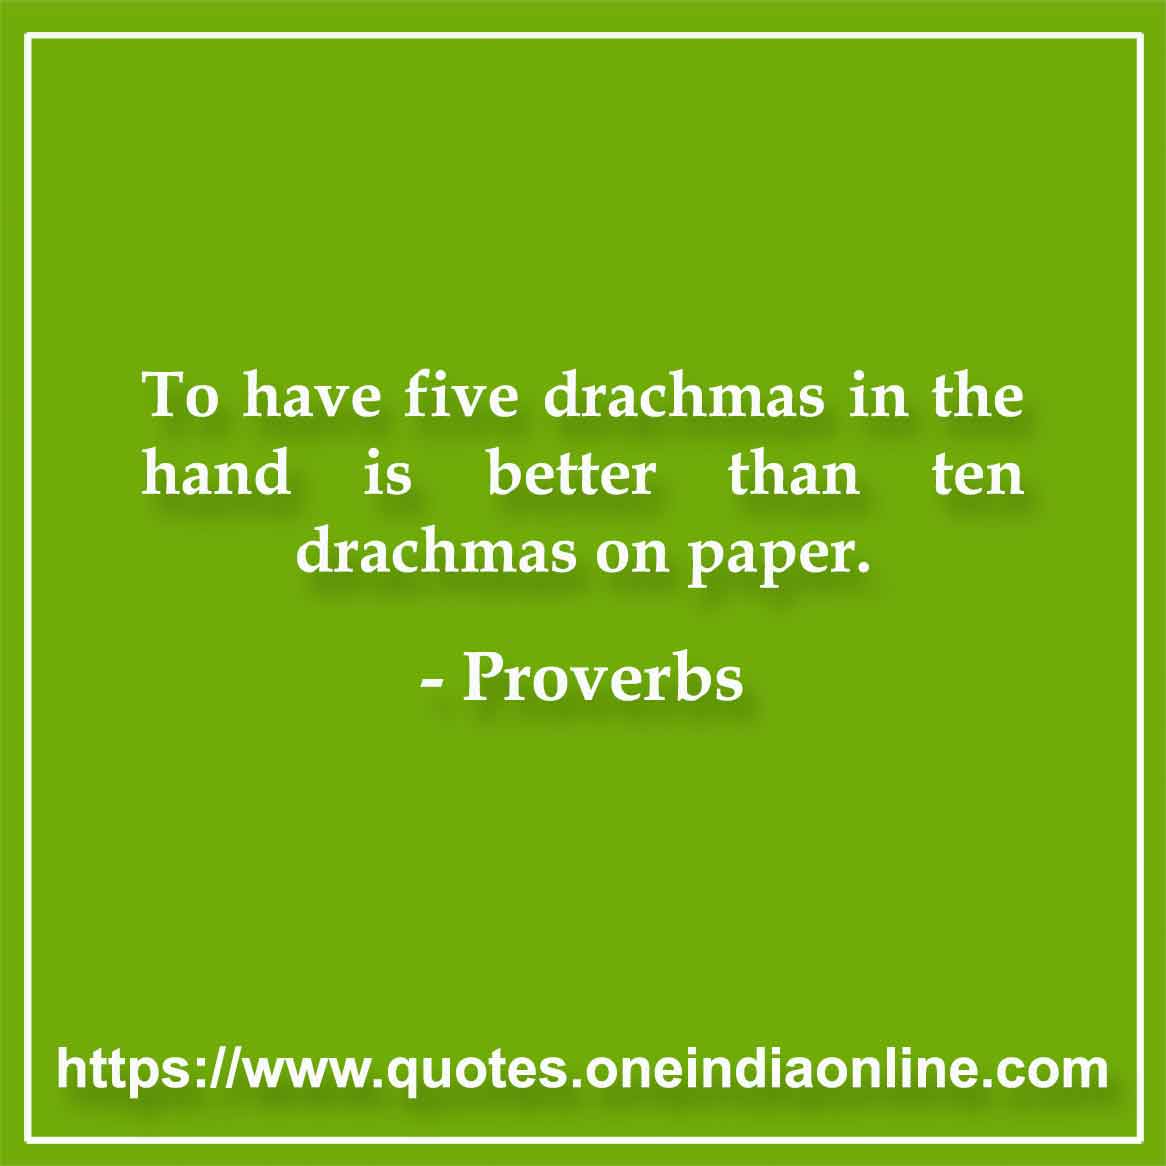 To have five drachmas in the hand is better than ten drachmas on paper.

Greek 